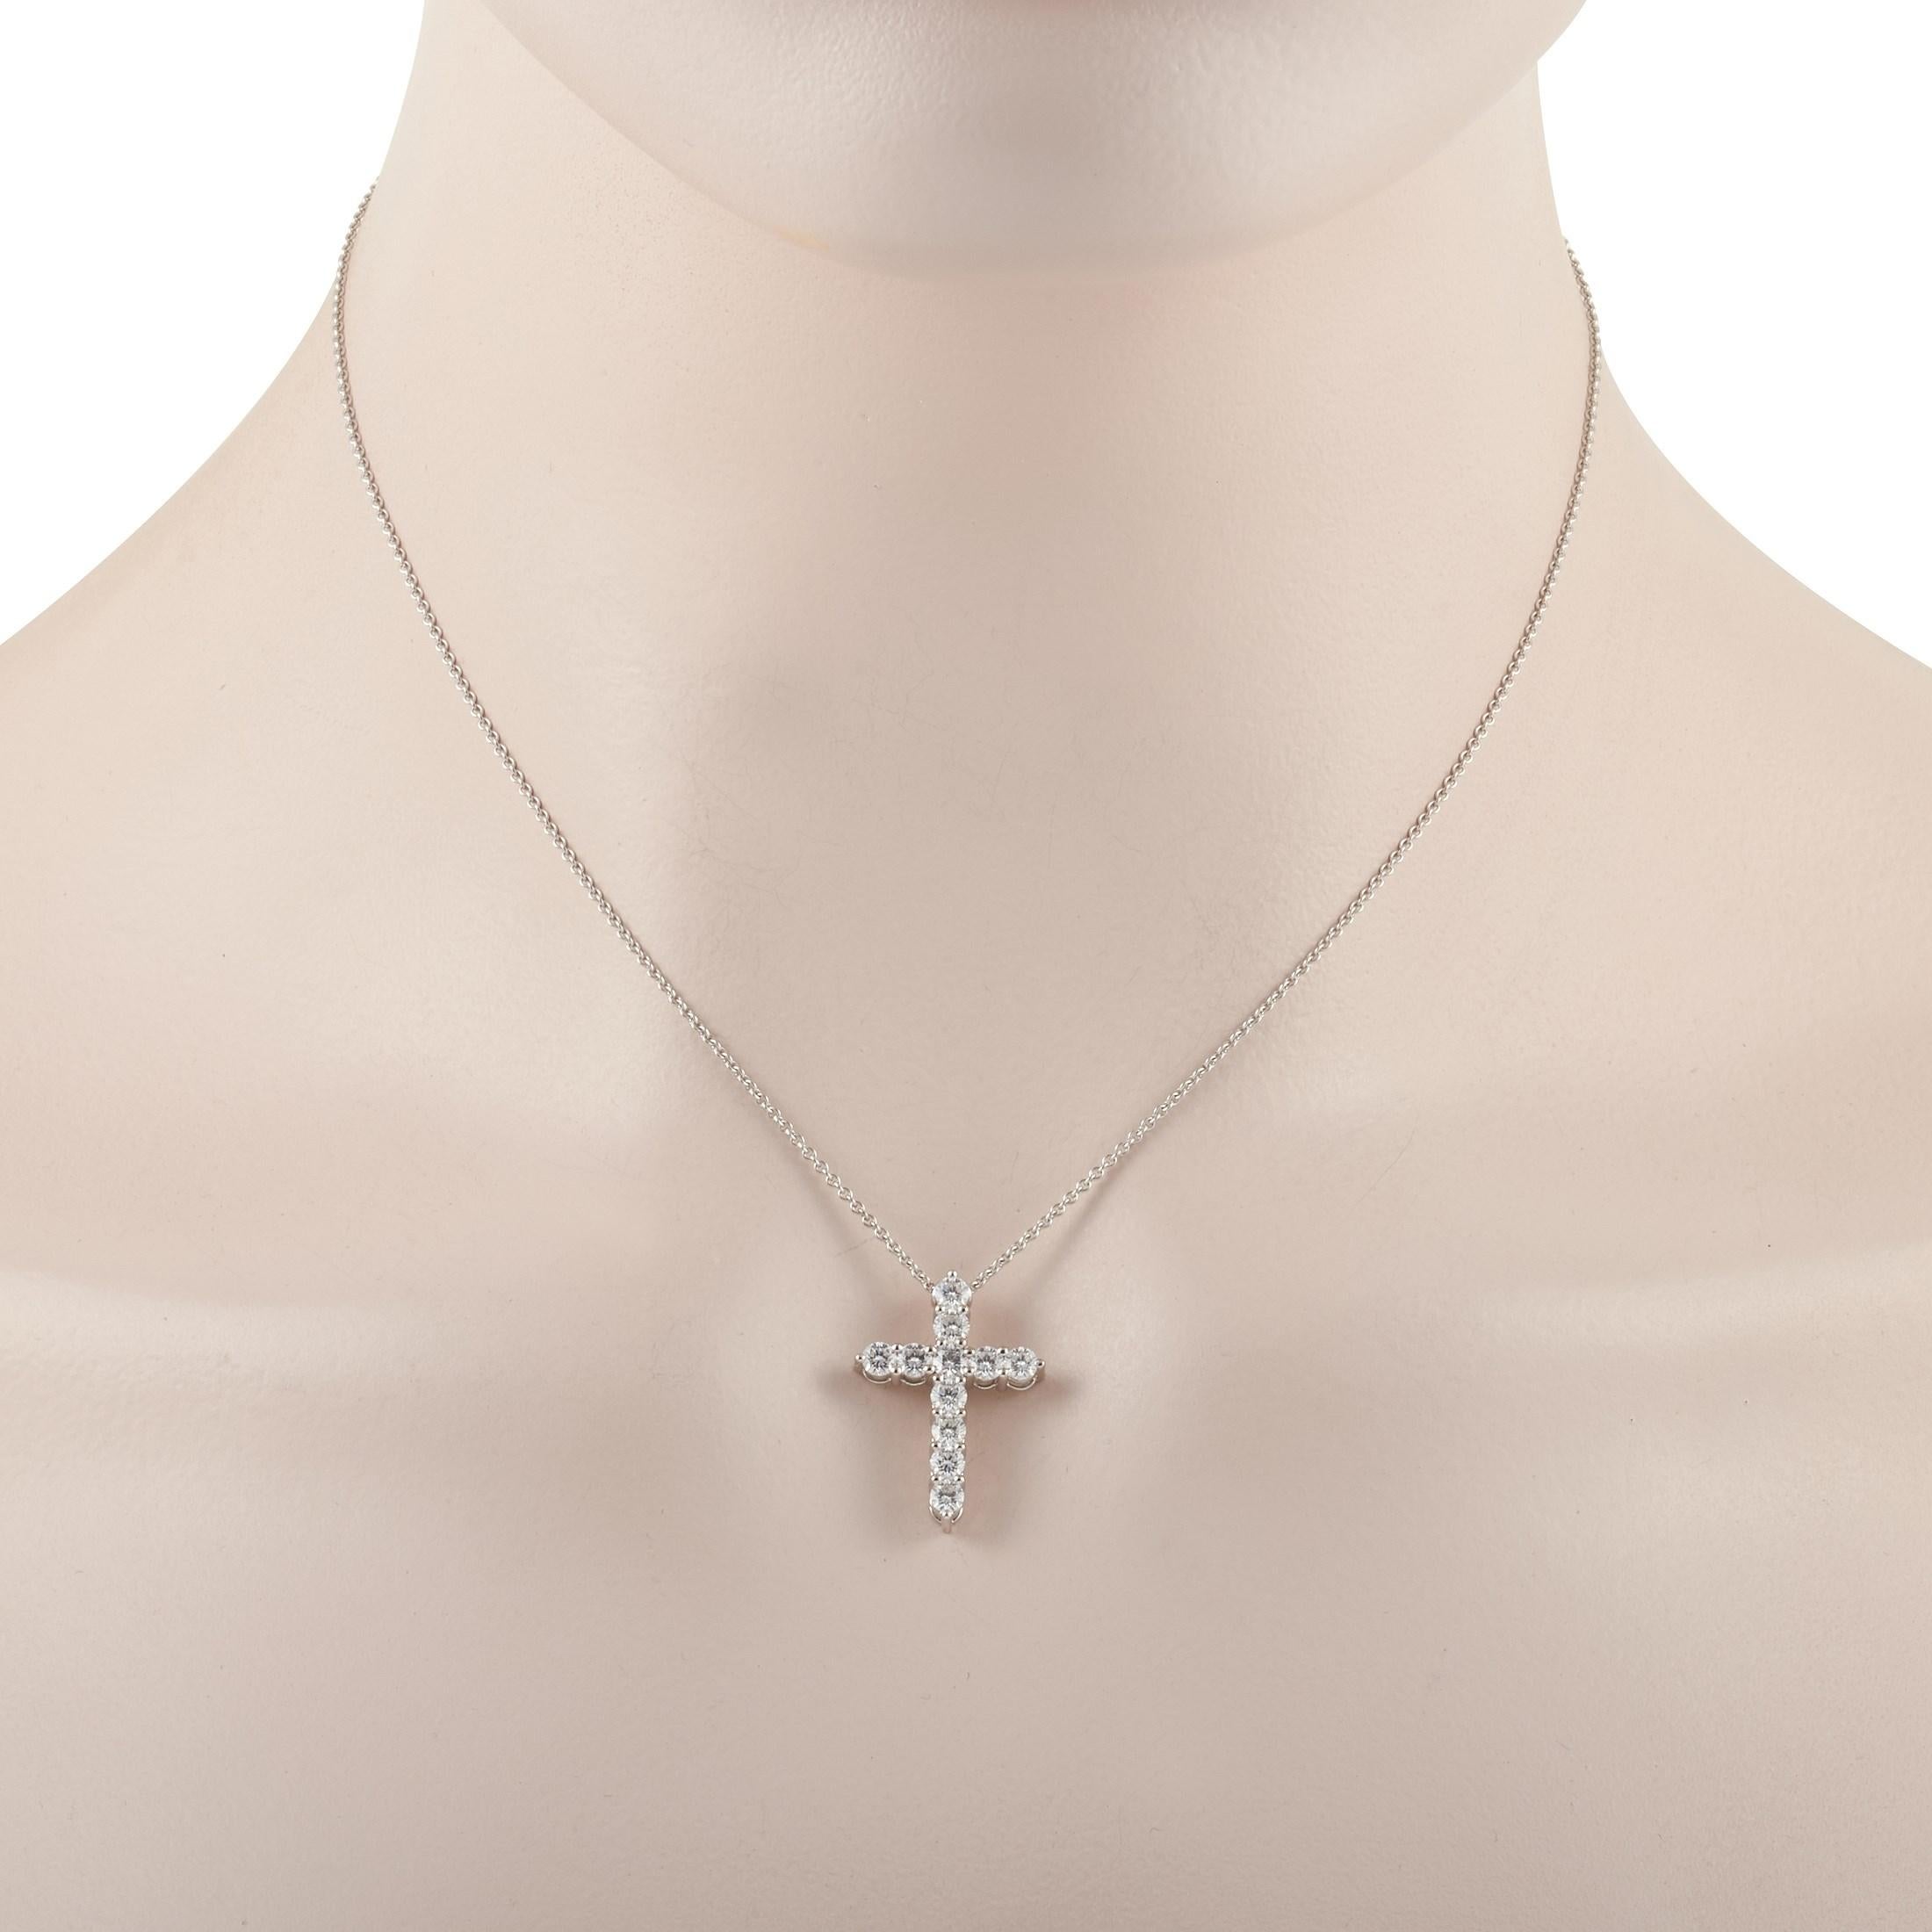 This pretty Graff 18K White Gold 1.10 ct Diamond Cross Necklace is made crafted of 18K white gold, and features a cross pendant on a chain set with diamonds that weigh 1.10 carats of E color and VVS Clarity. The dainty chain measures 15 inches in